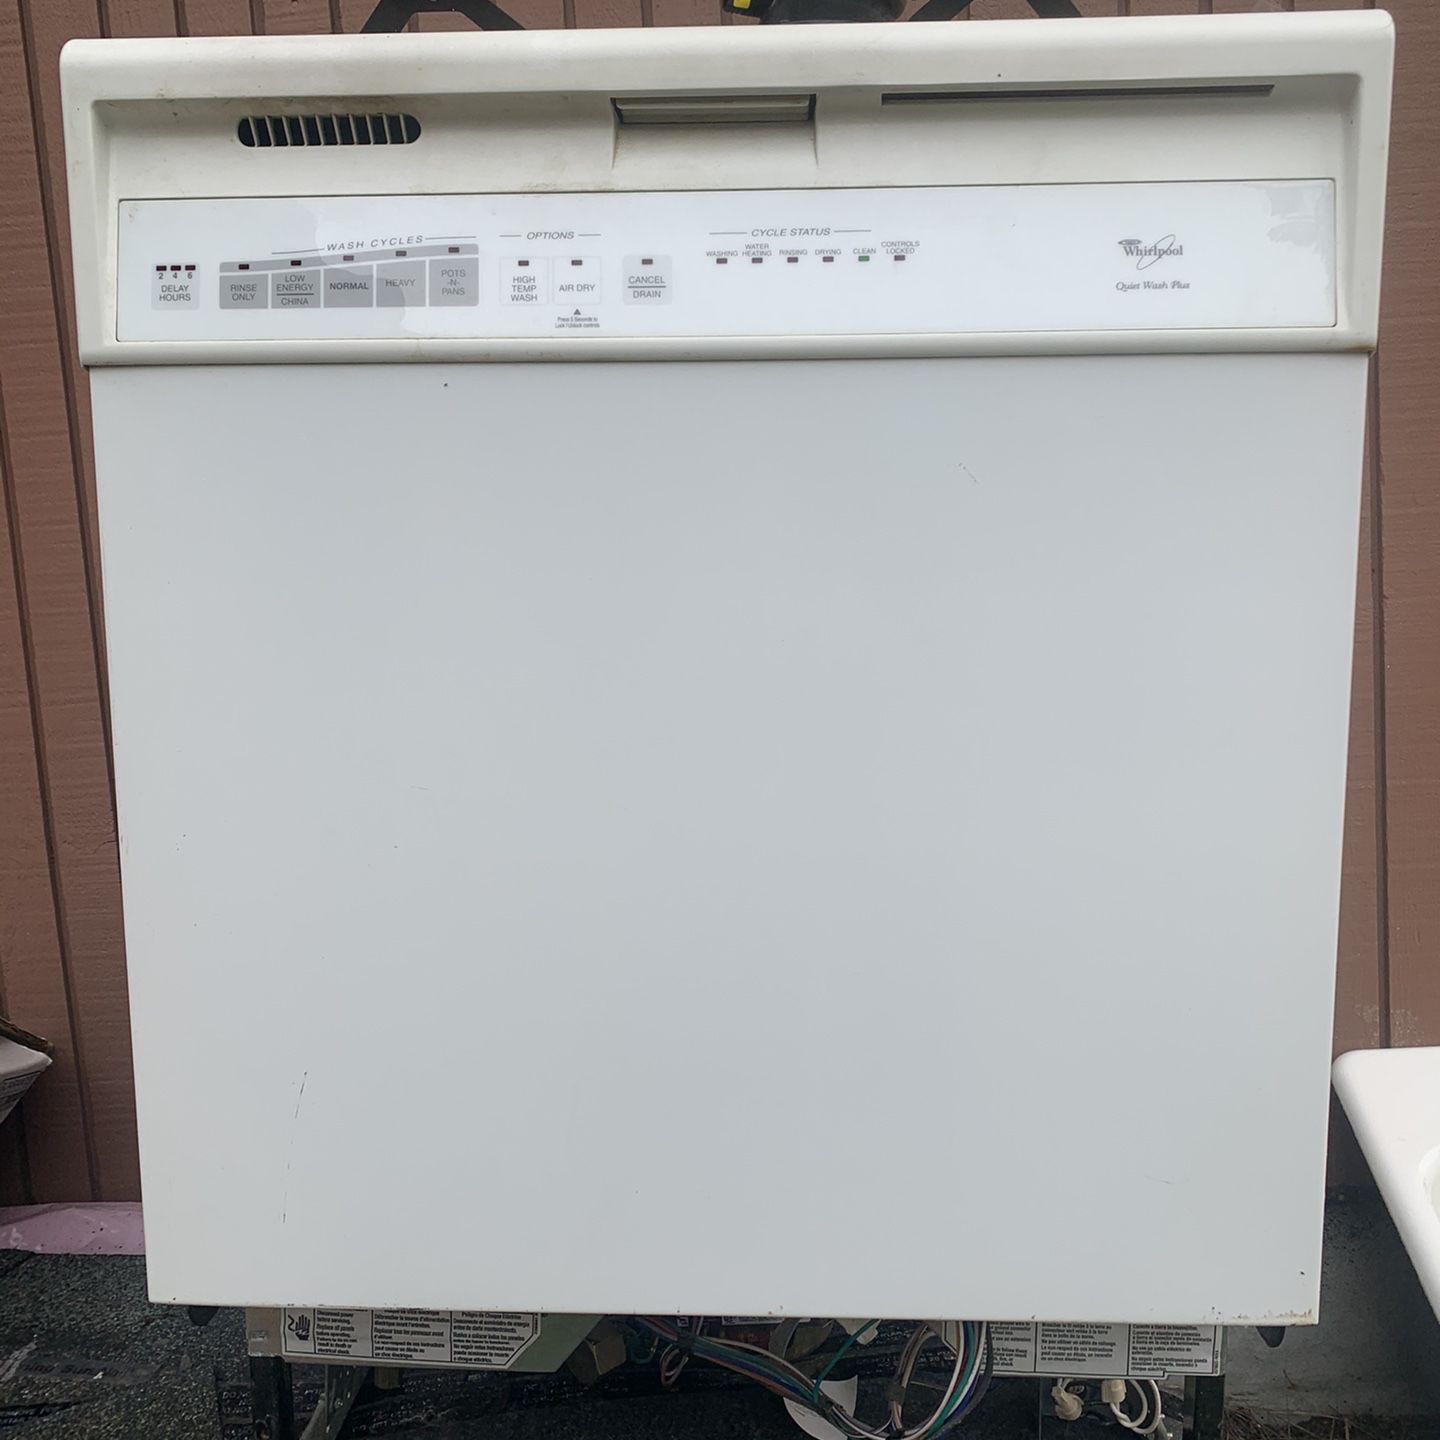 Whirlpool Quiet Wash Dishwasher With Discharge And Supply Hoses